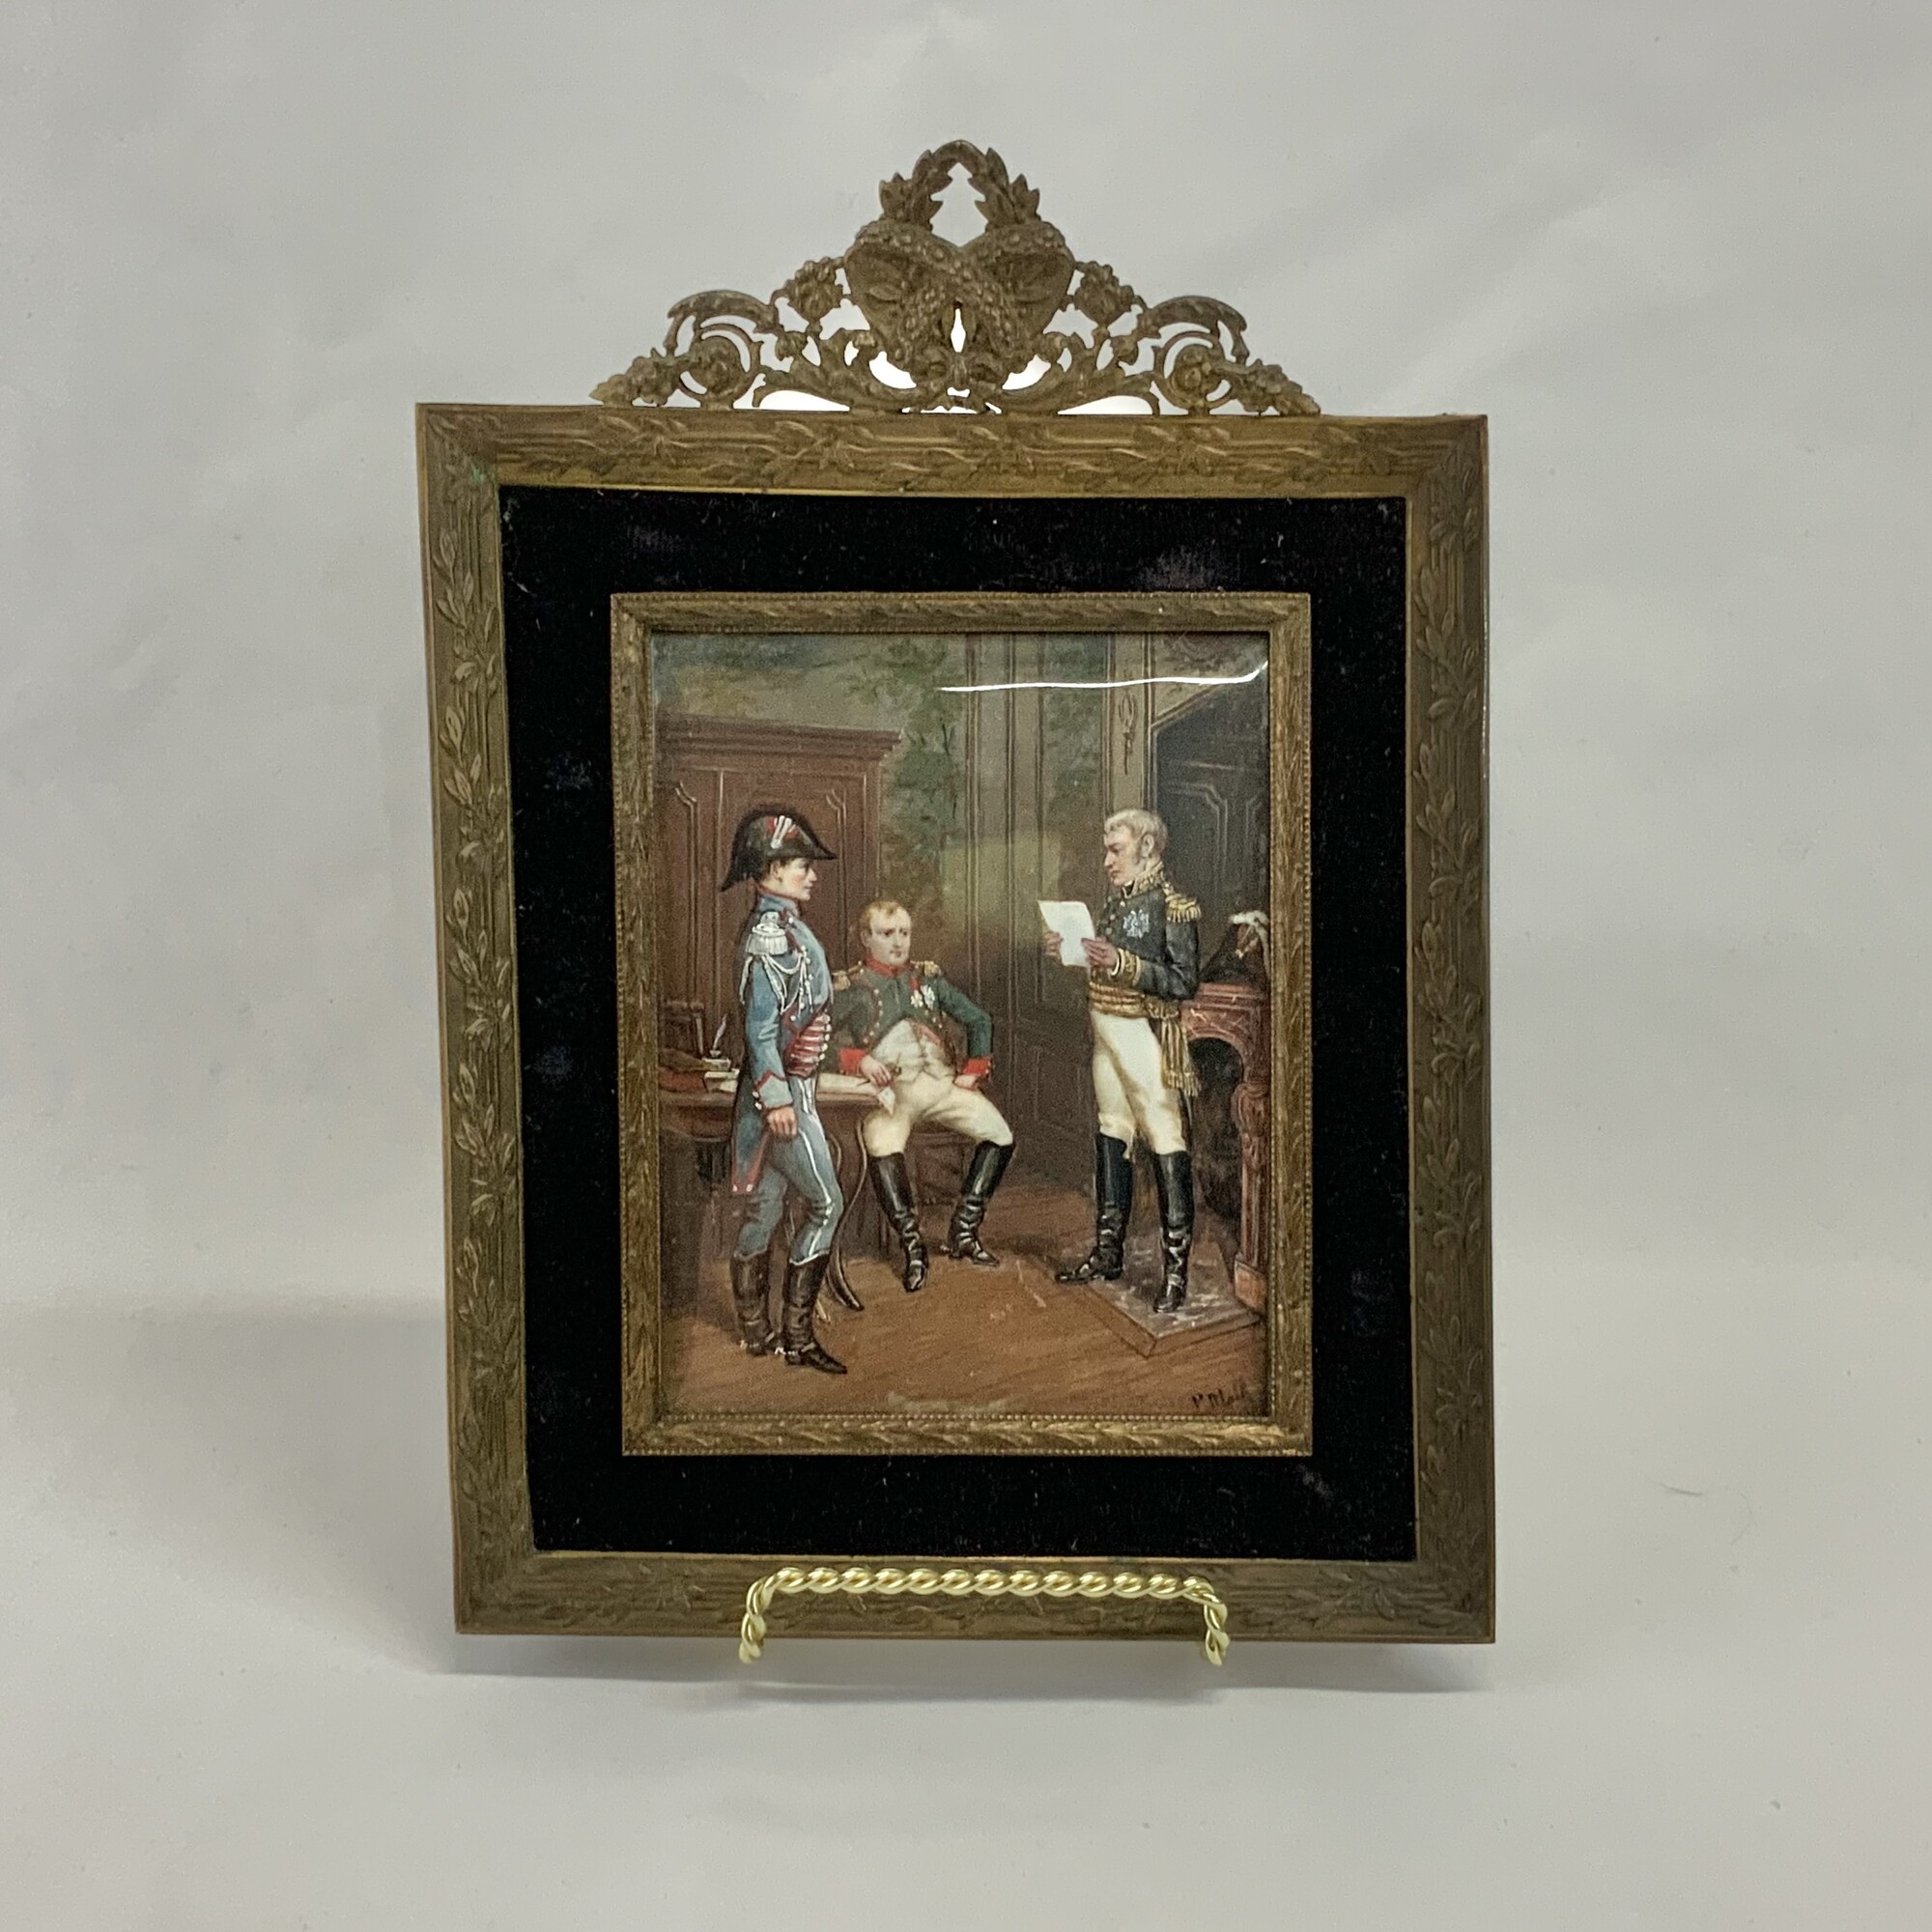 Antique ornately framed miniature painting Le Raport by P Blain Painted on porcelain it is signed and the title of the painting is inscribed on the back
The back of the frame is covered in an antique fabric.
Painting approx 5 by 4 inches  With frame 9 by 6.5 inches
Very good age appropriate condition.